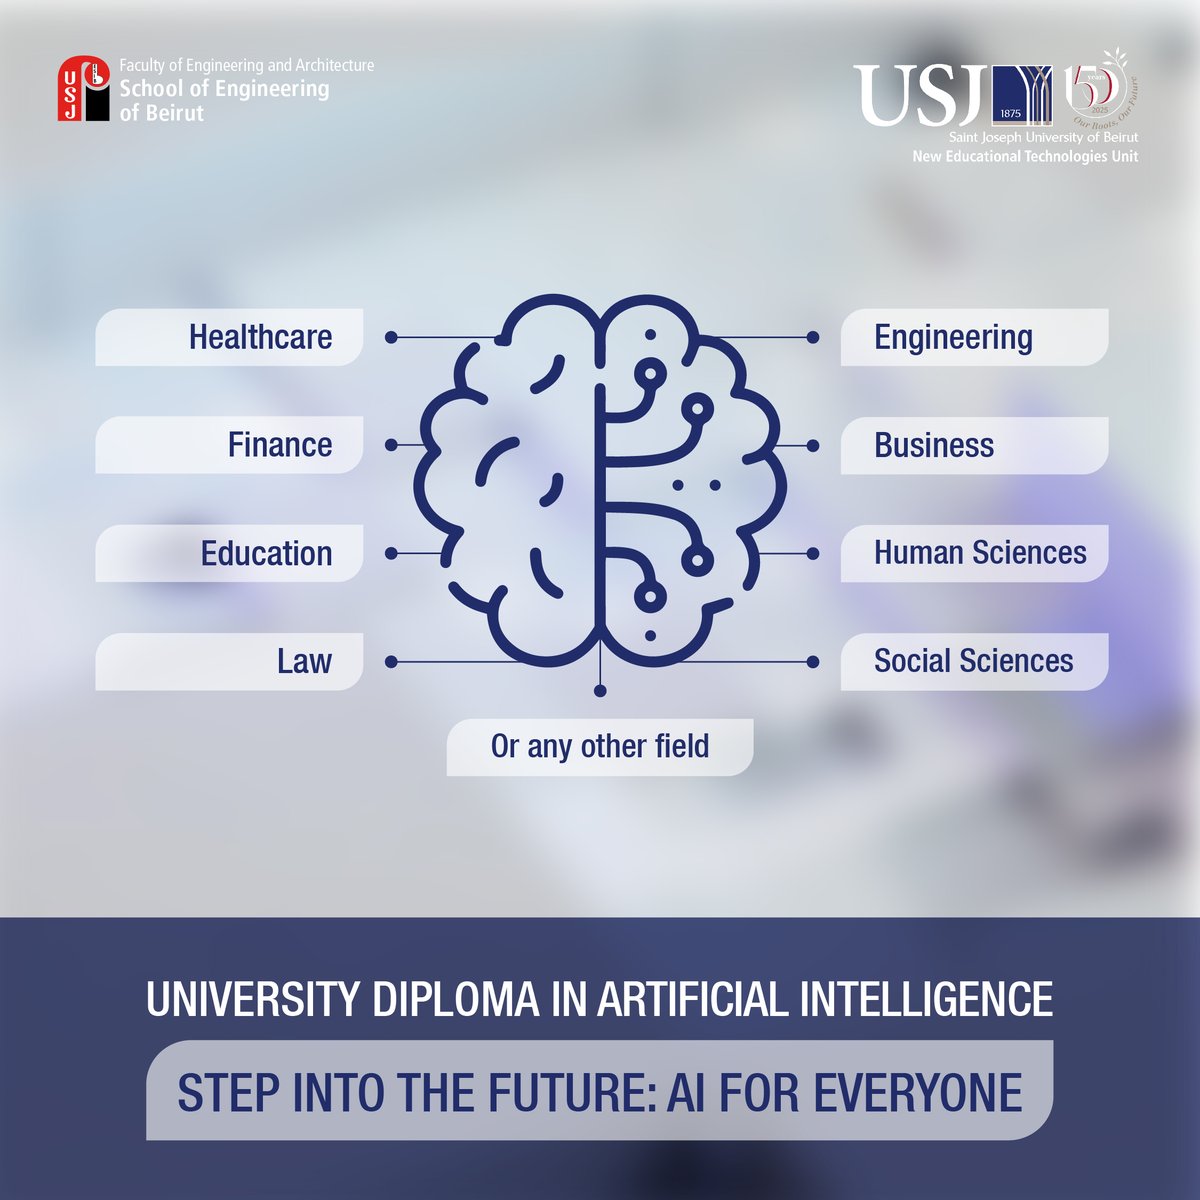 AI is transforming every sector! Explore the endless possibilities with our University Diploma in AI! Don’t miss out! Secure your spot today and stay at the forefront of innovation! For more info: lnkd.in/dzVg2J4u #AI #Artificiallntelligence #Engineering #Business